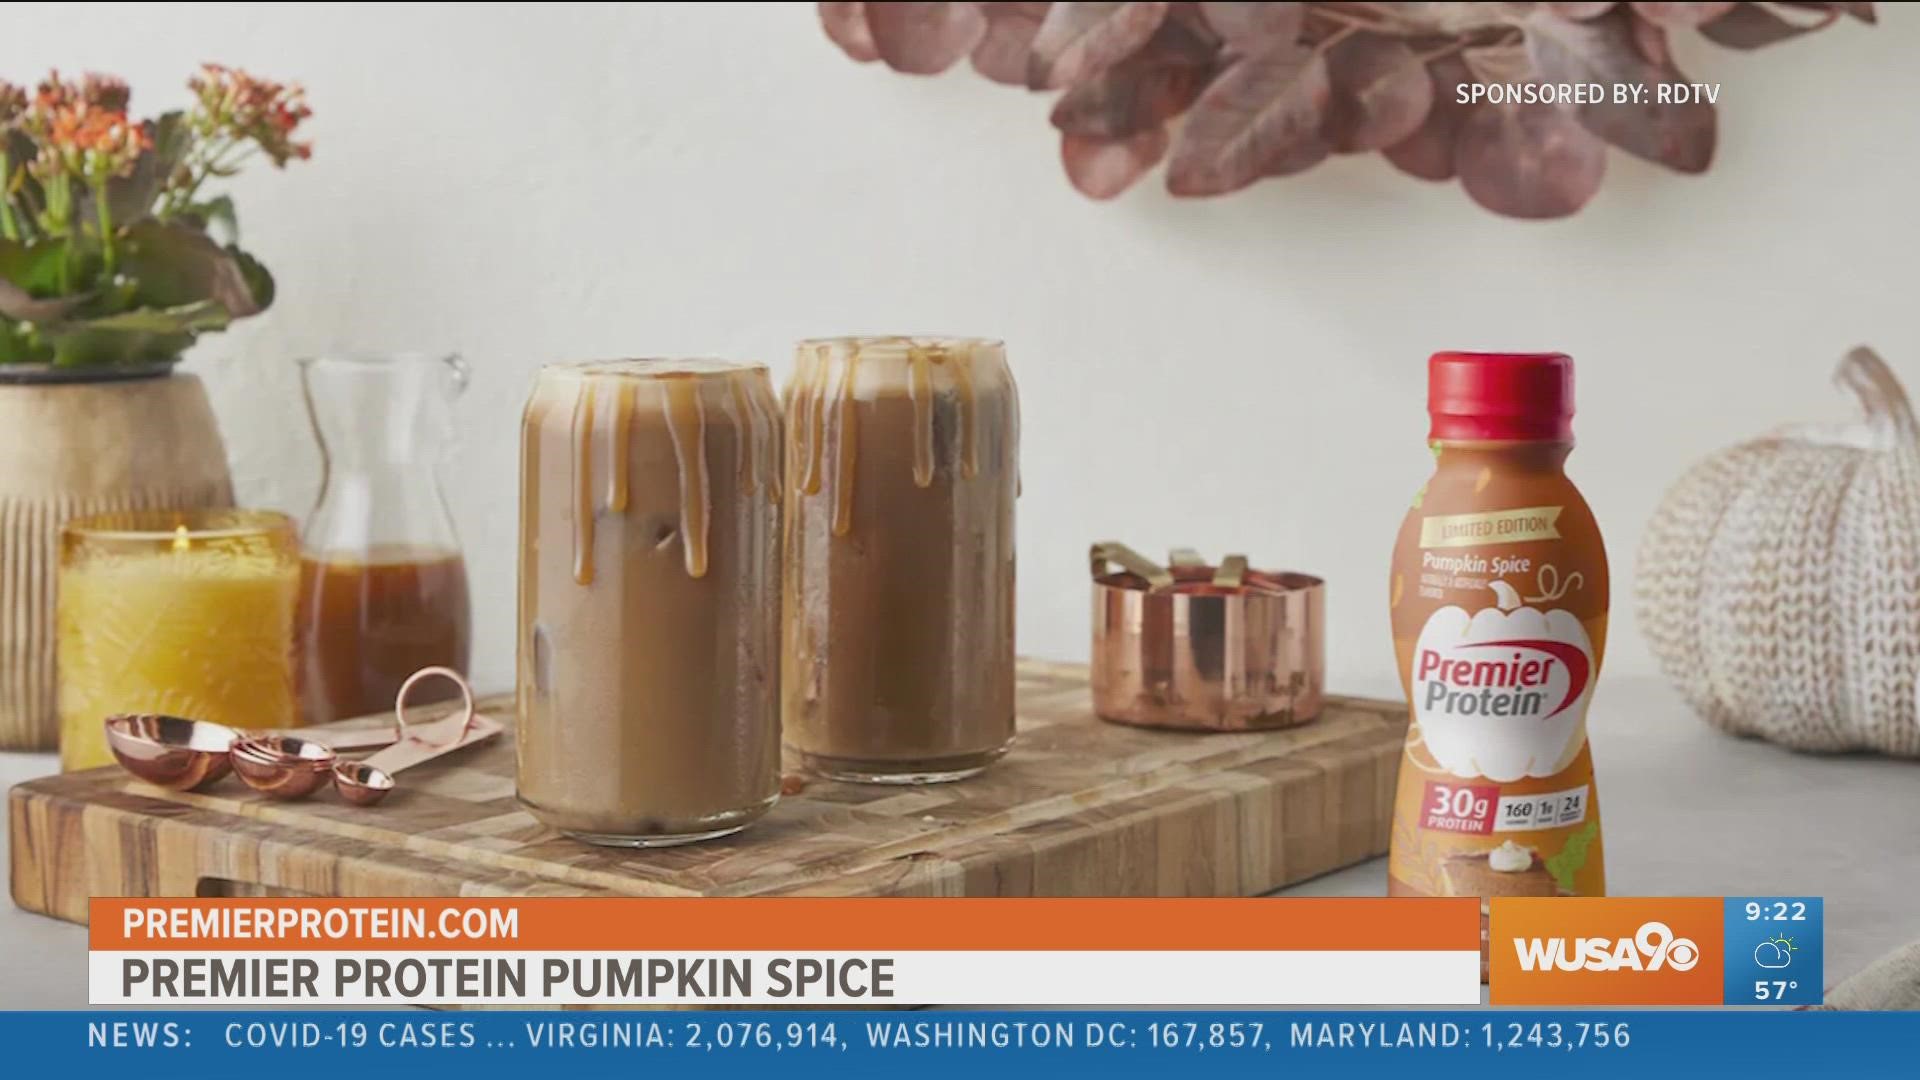 Sponsored by: RDTV. Registered Dietitian Beth Warren has some tips on healthy fall recipes for the family. For more info go to premierprotein.com.